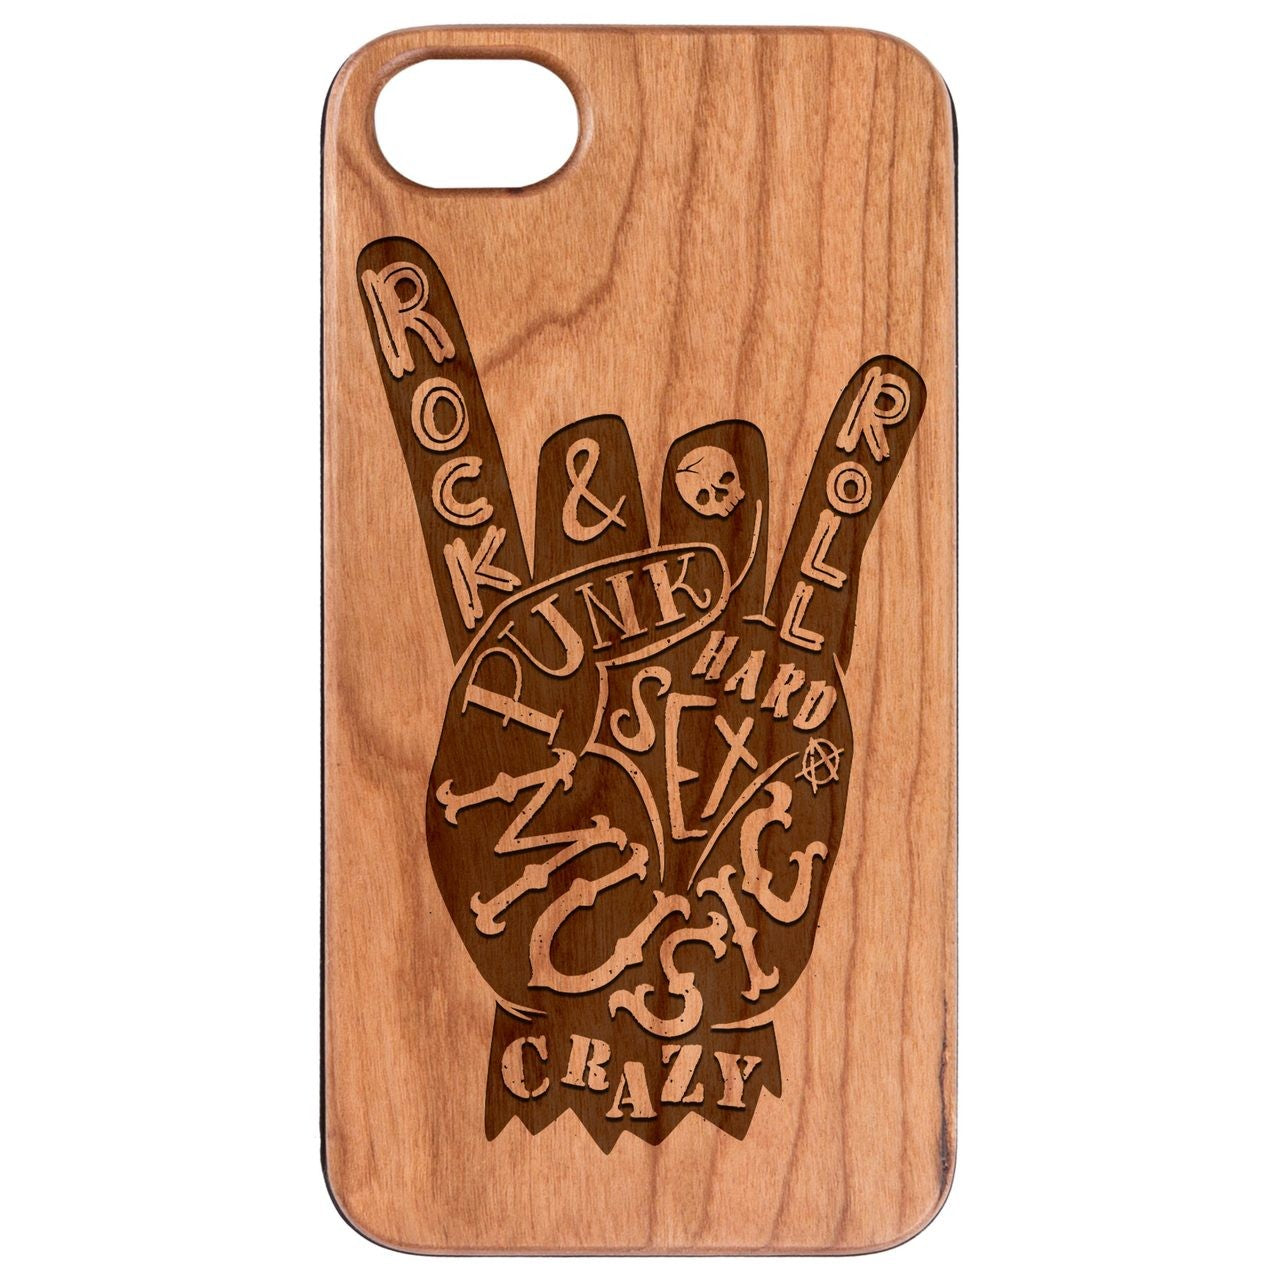  Rock n Roll Hand - Engraved - Wooden Phone Case - IPhone 13 Models